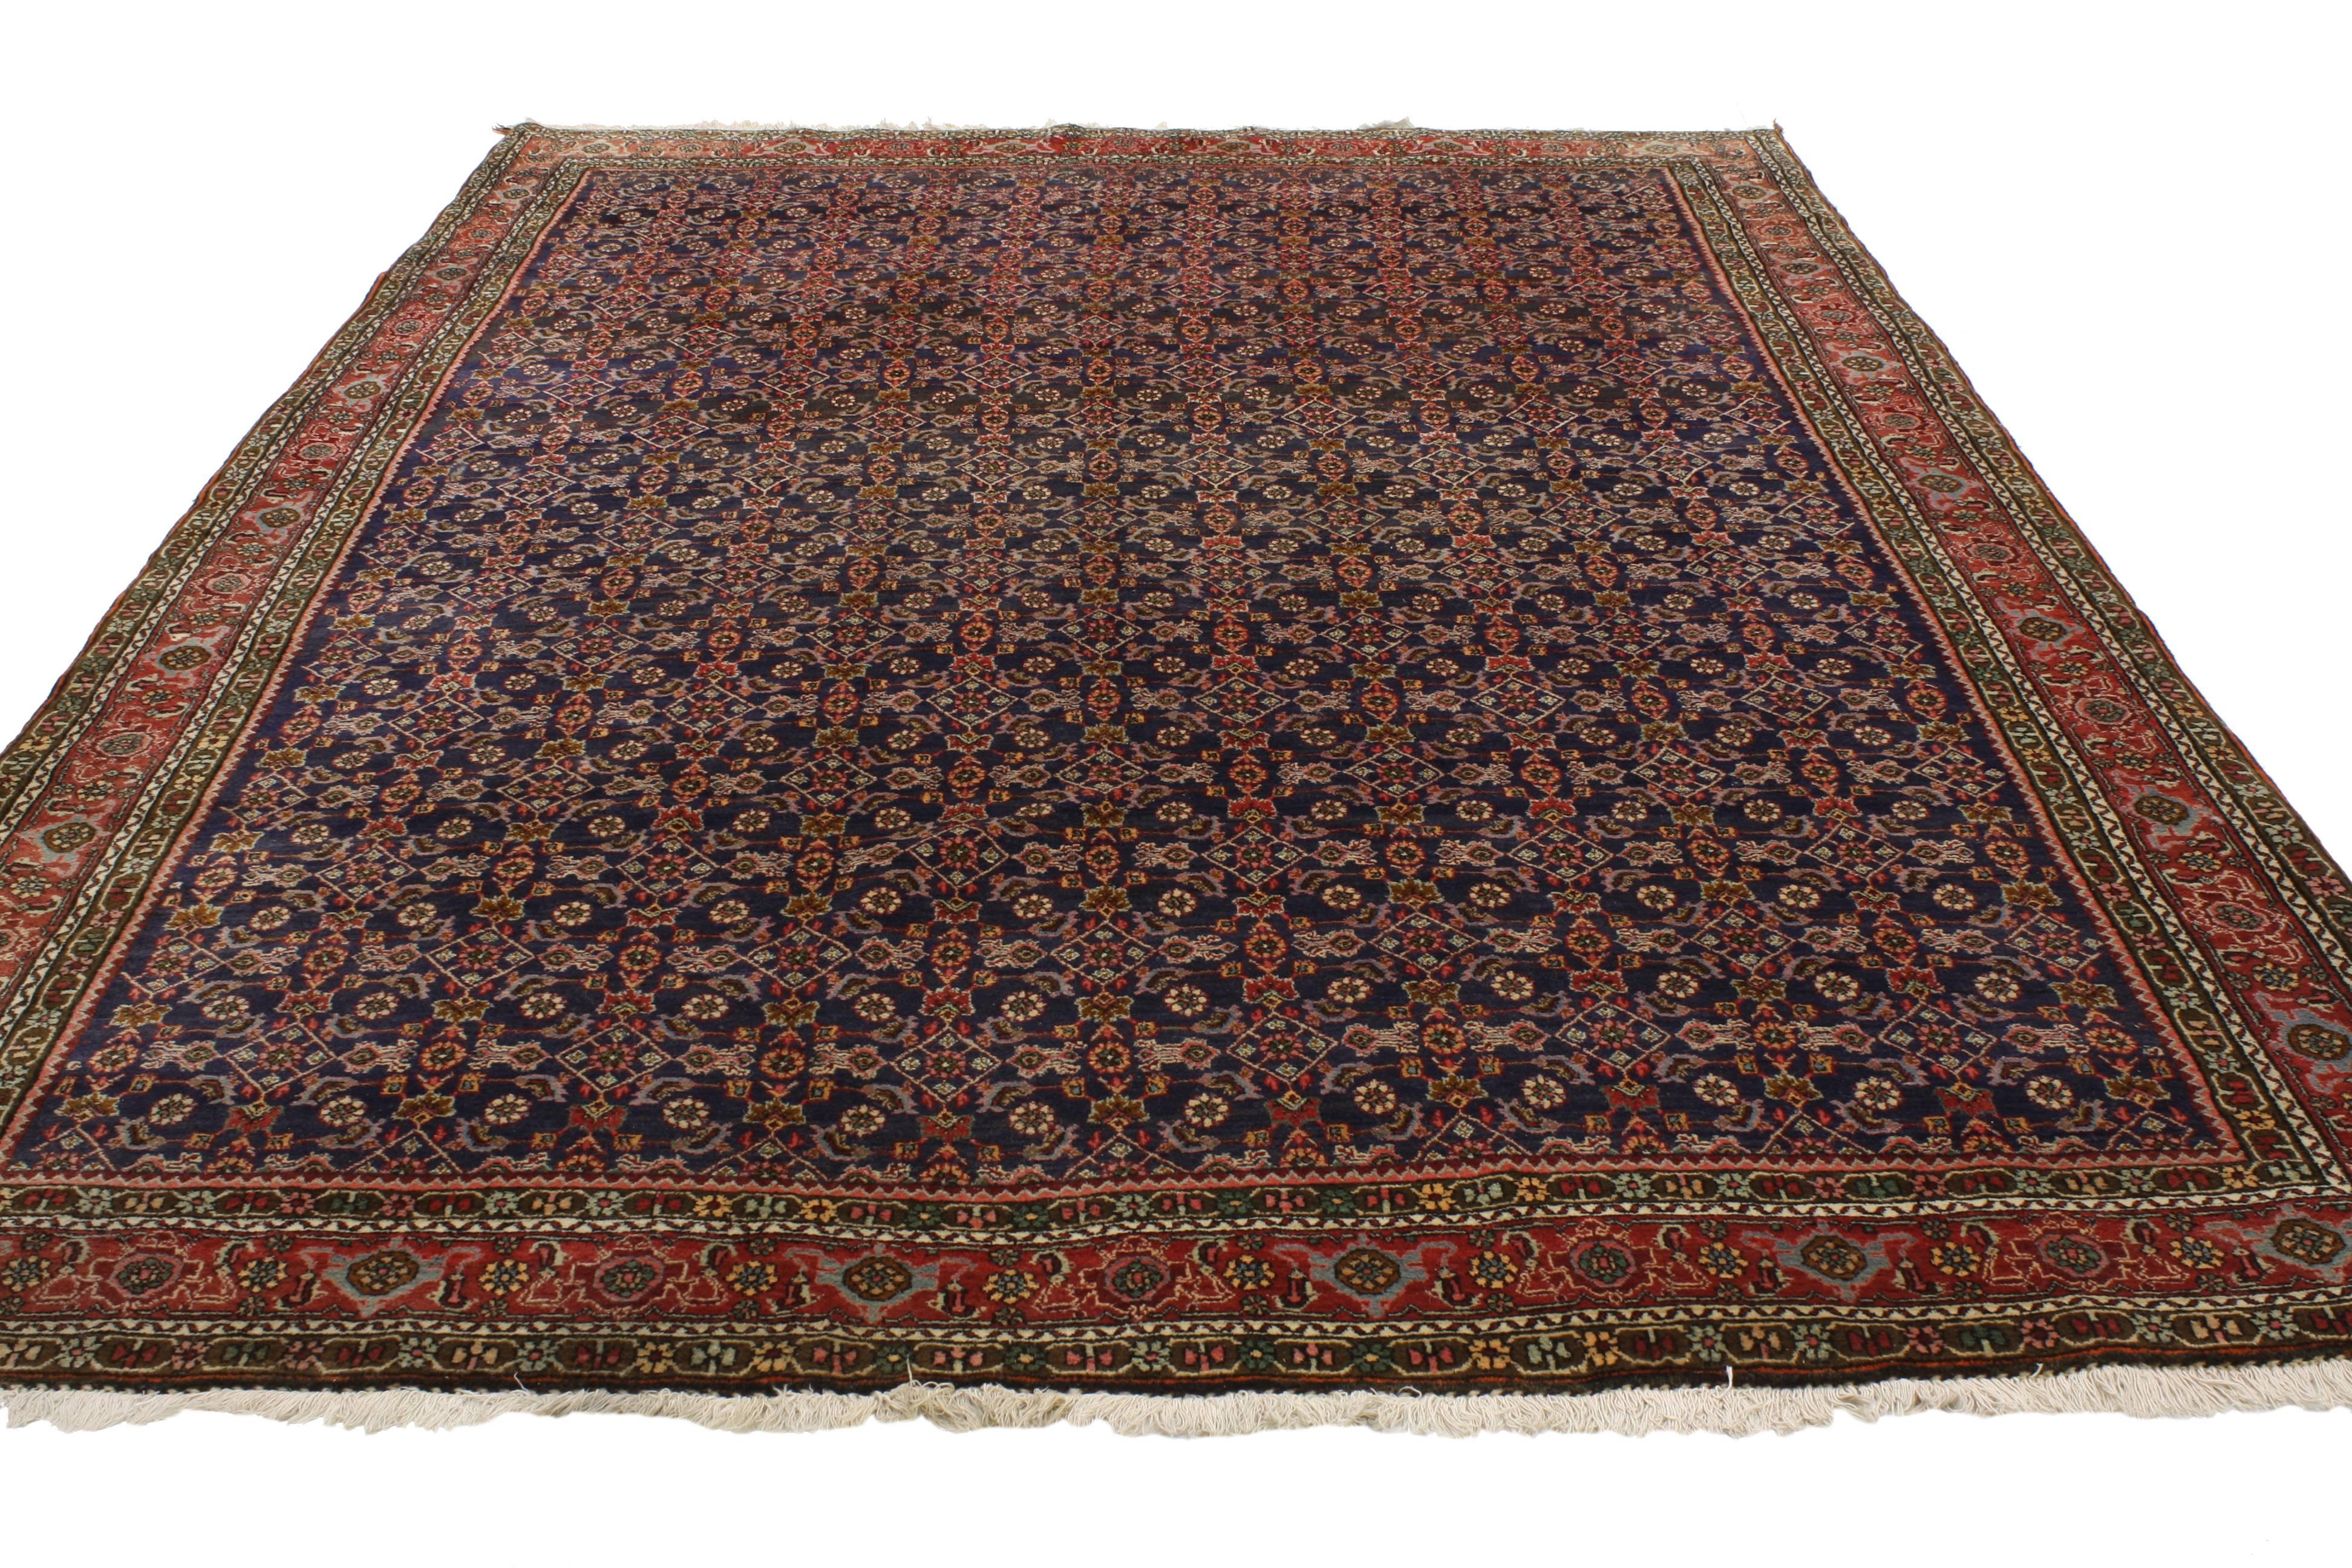 Hand-Knotted Antique Bijar Persian Rug with Modern Traditional Style, the Iron Rugs of Persia